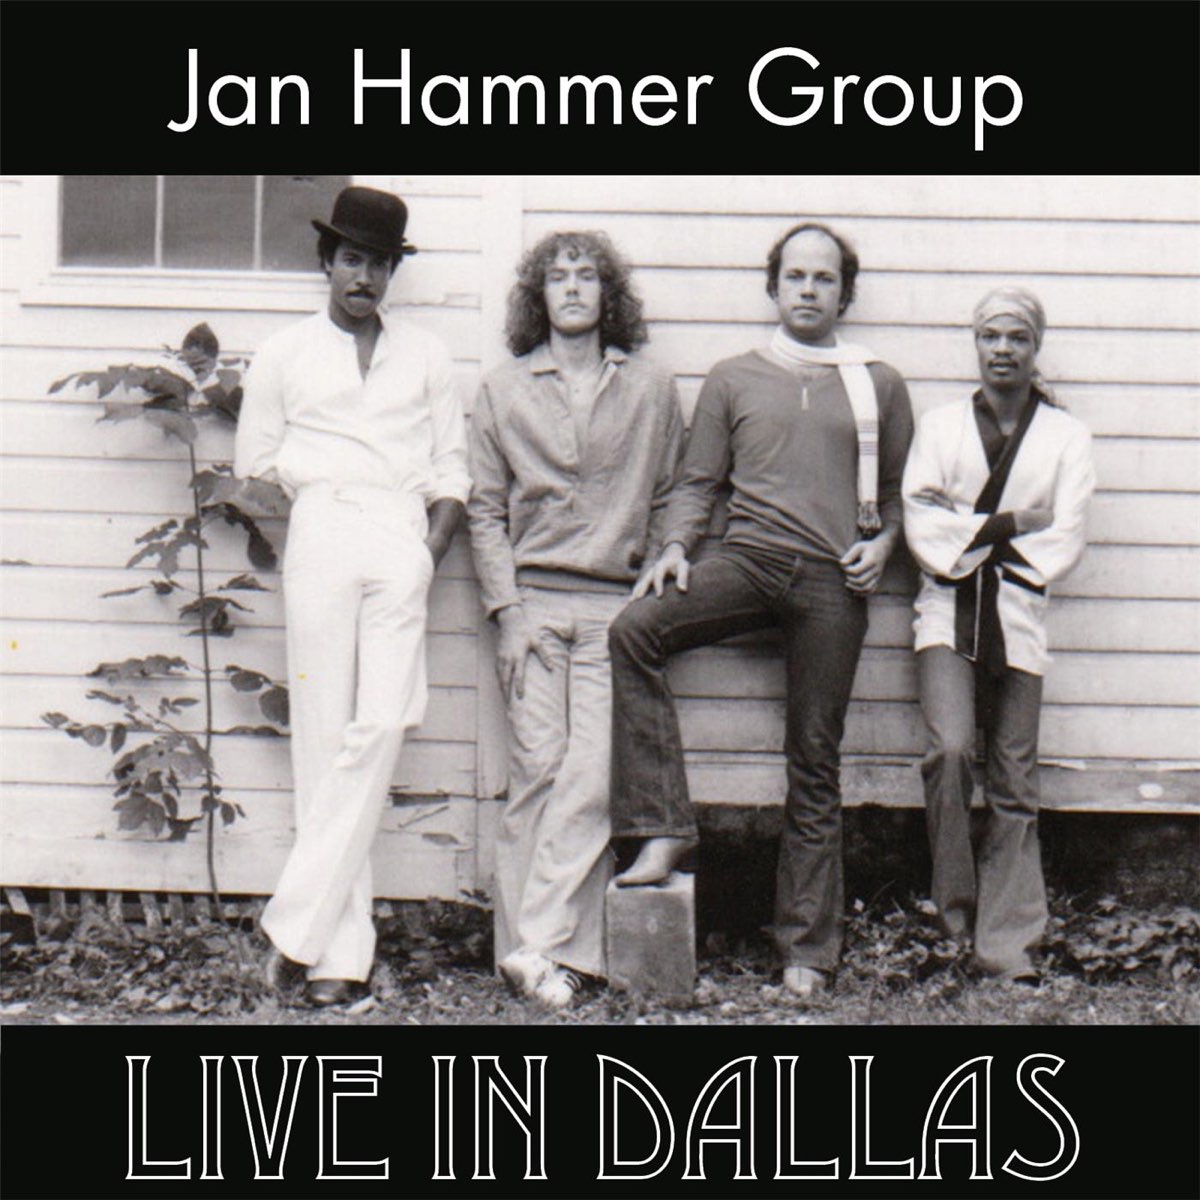 Live in Dallas by Jan Hammer Group on Apple Music